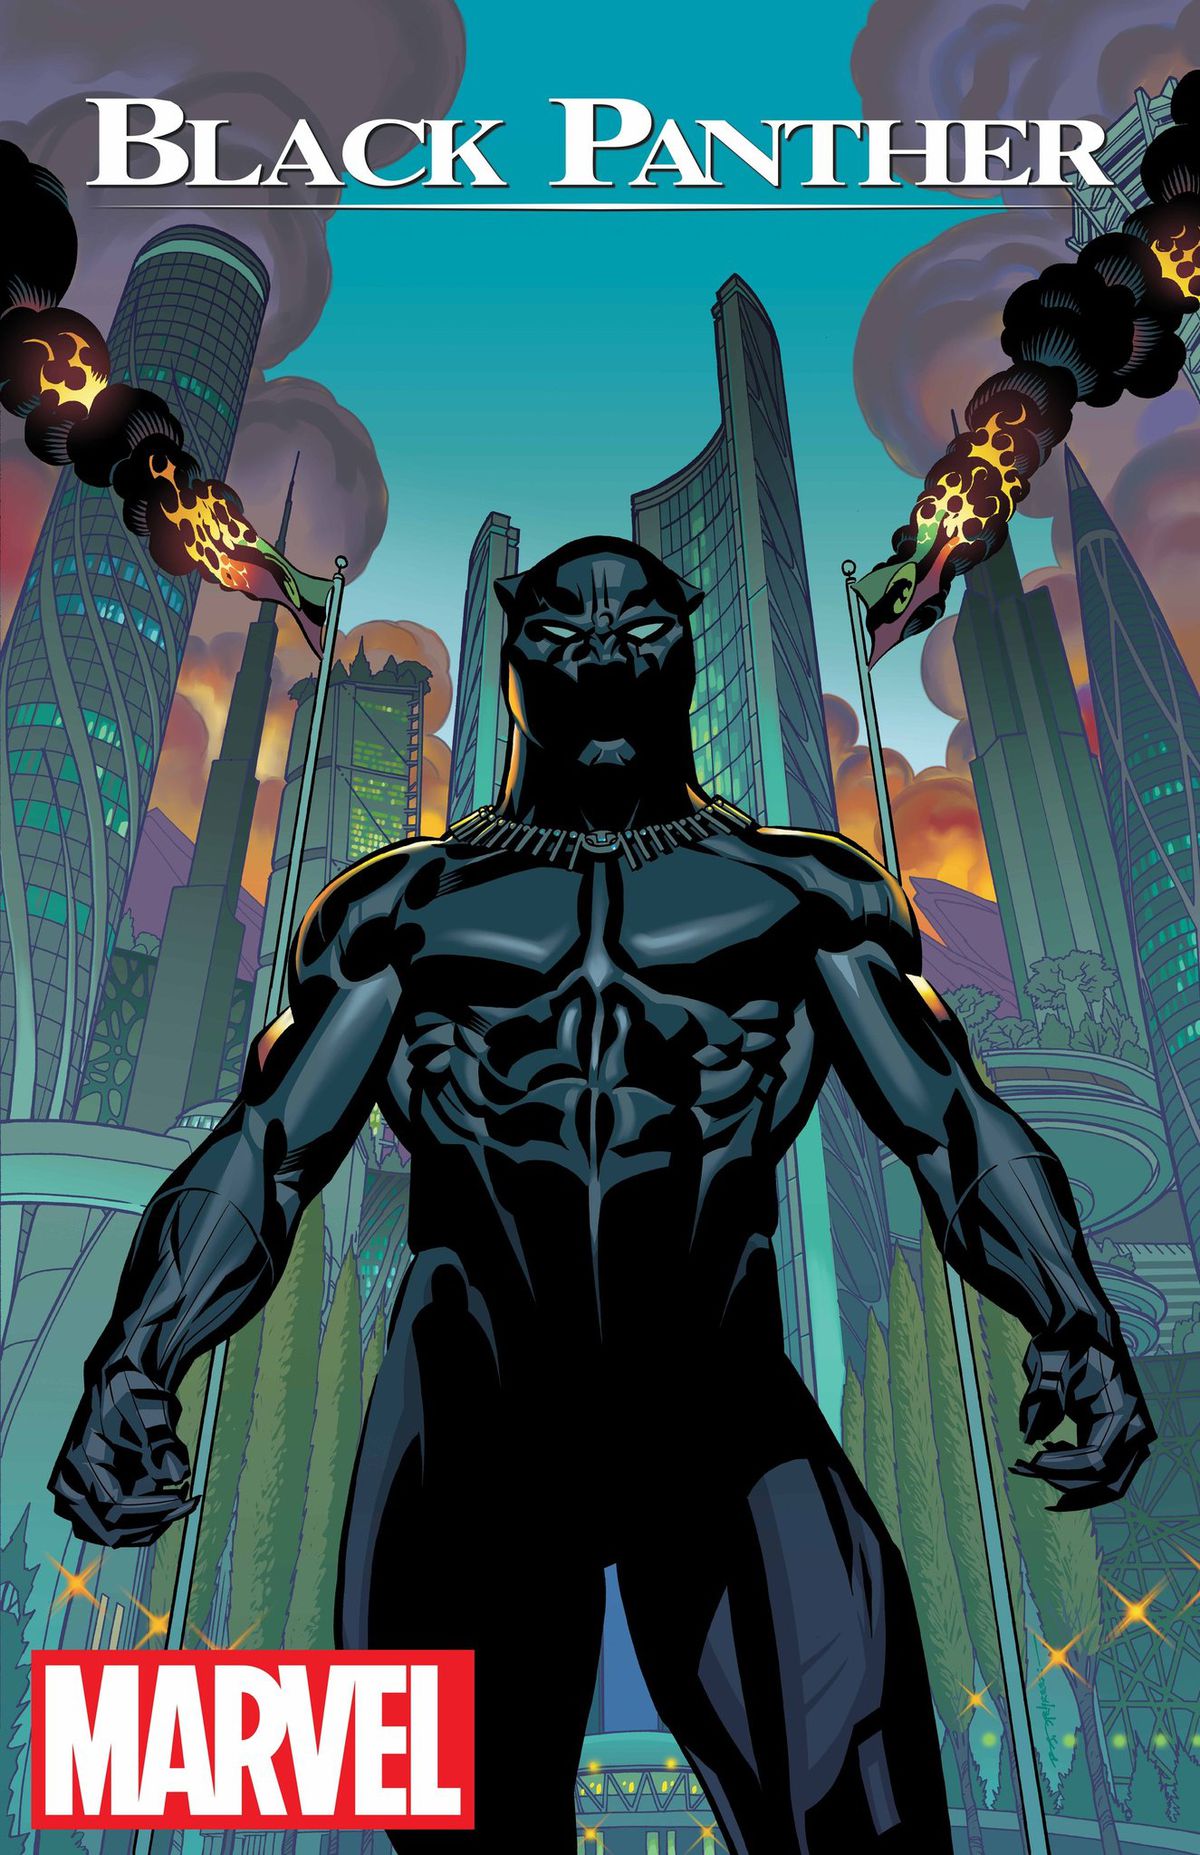 The cover to Coates's Black Panther (Marvel)